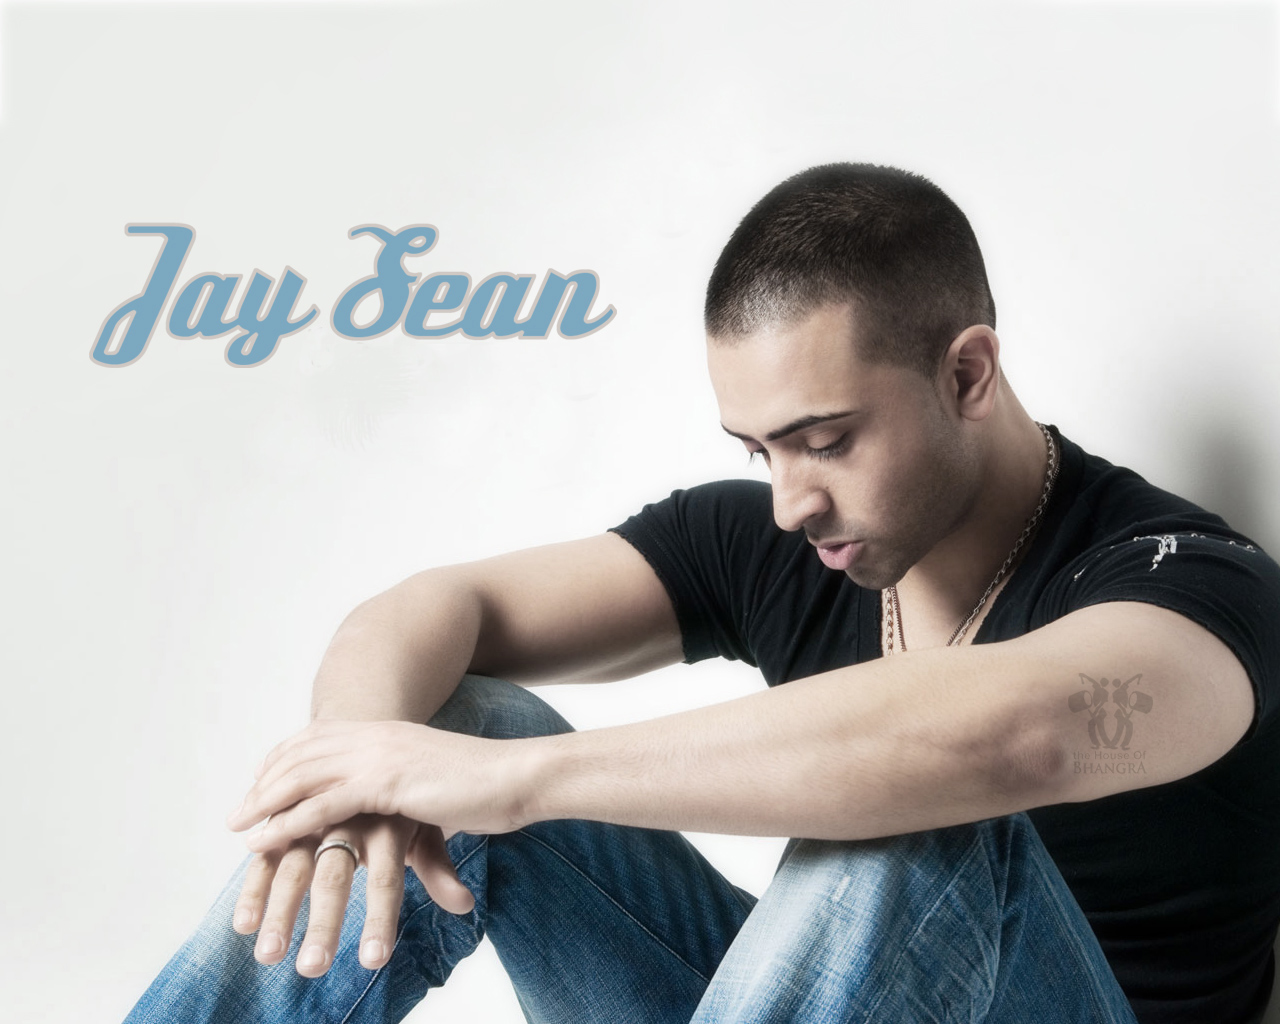 2012 Wallpapers of Jay Sean for Desktop and Profile Pics | Wallpapers ...